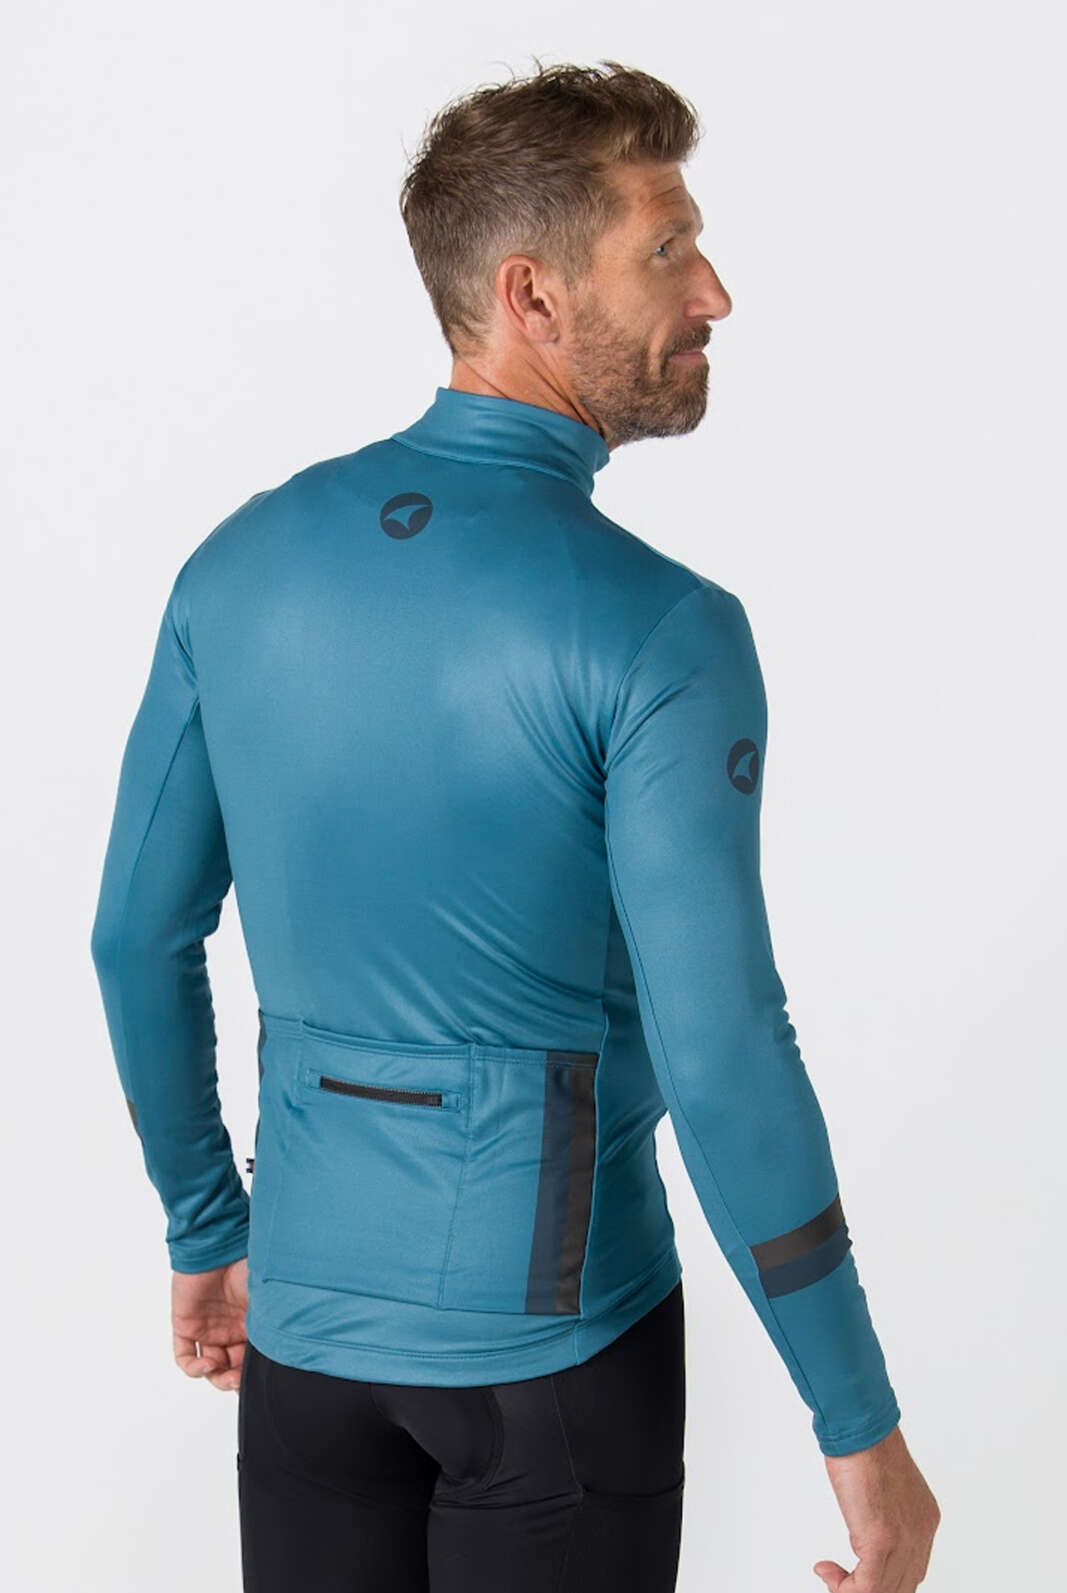 Men's Blue Thermal Cycling Jersey - Back View